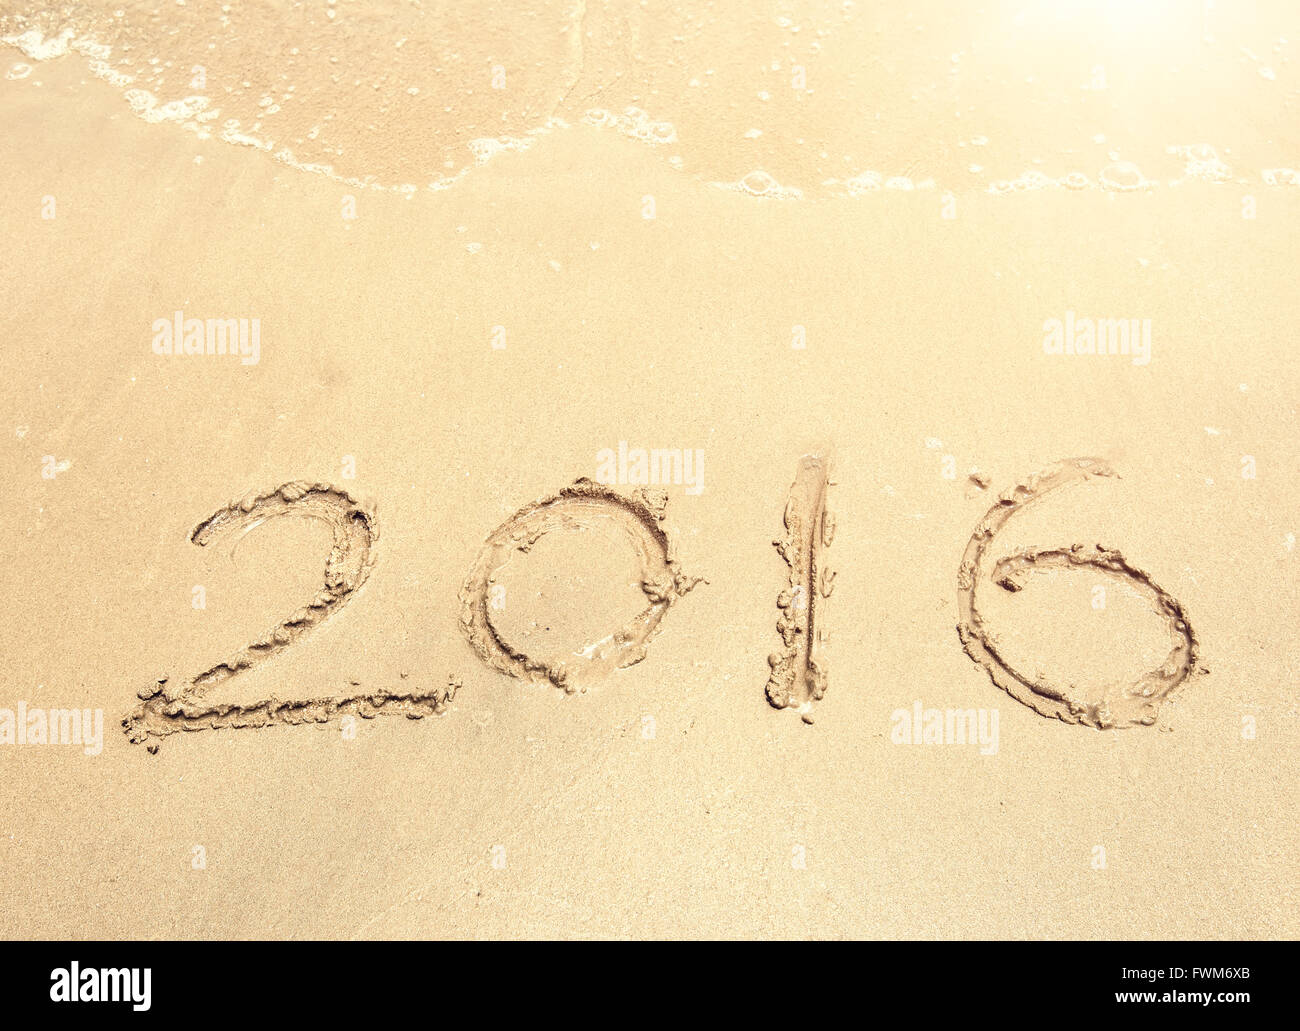 2016 year on the sea shore. Element of design Stock Photo